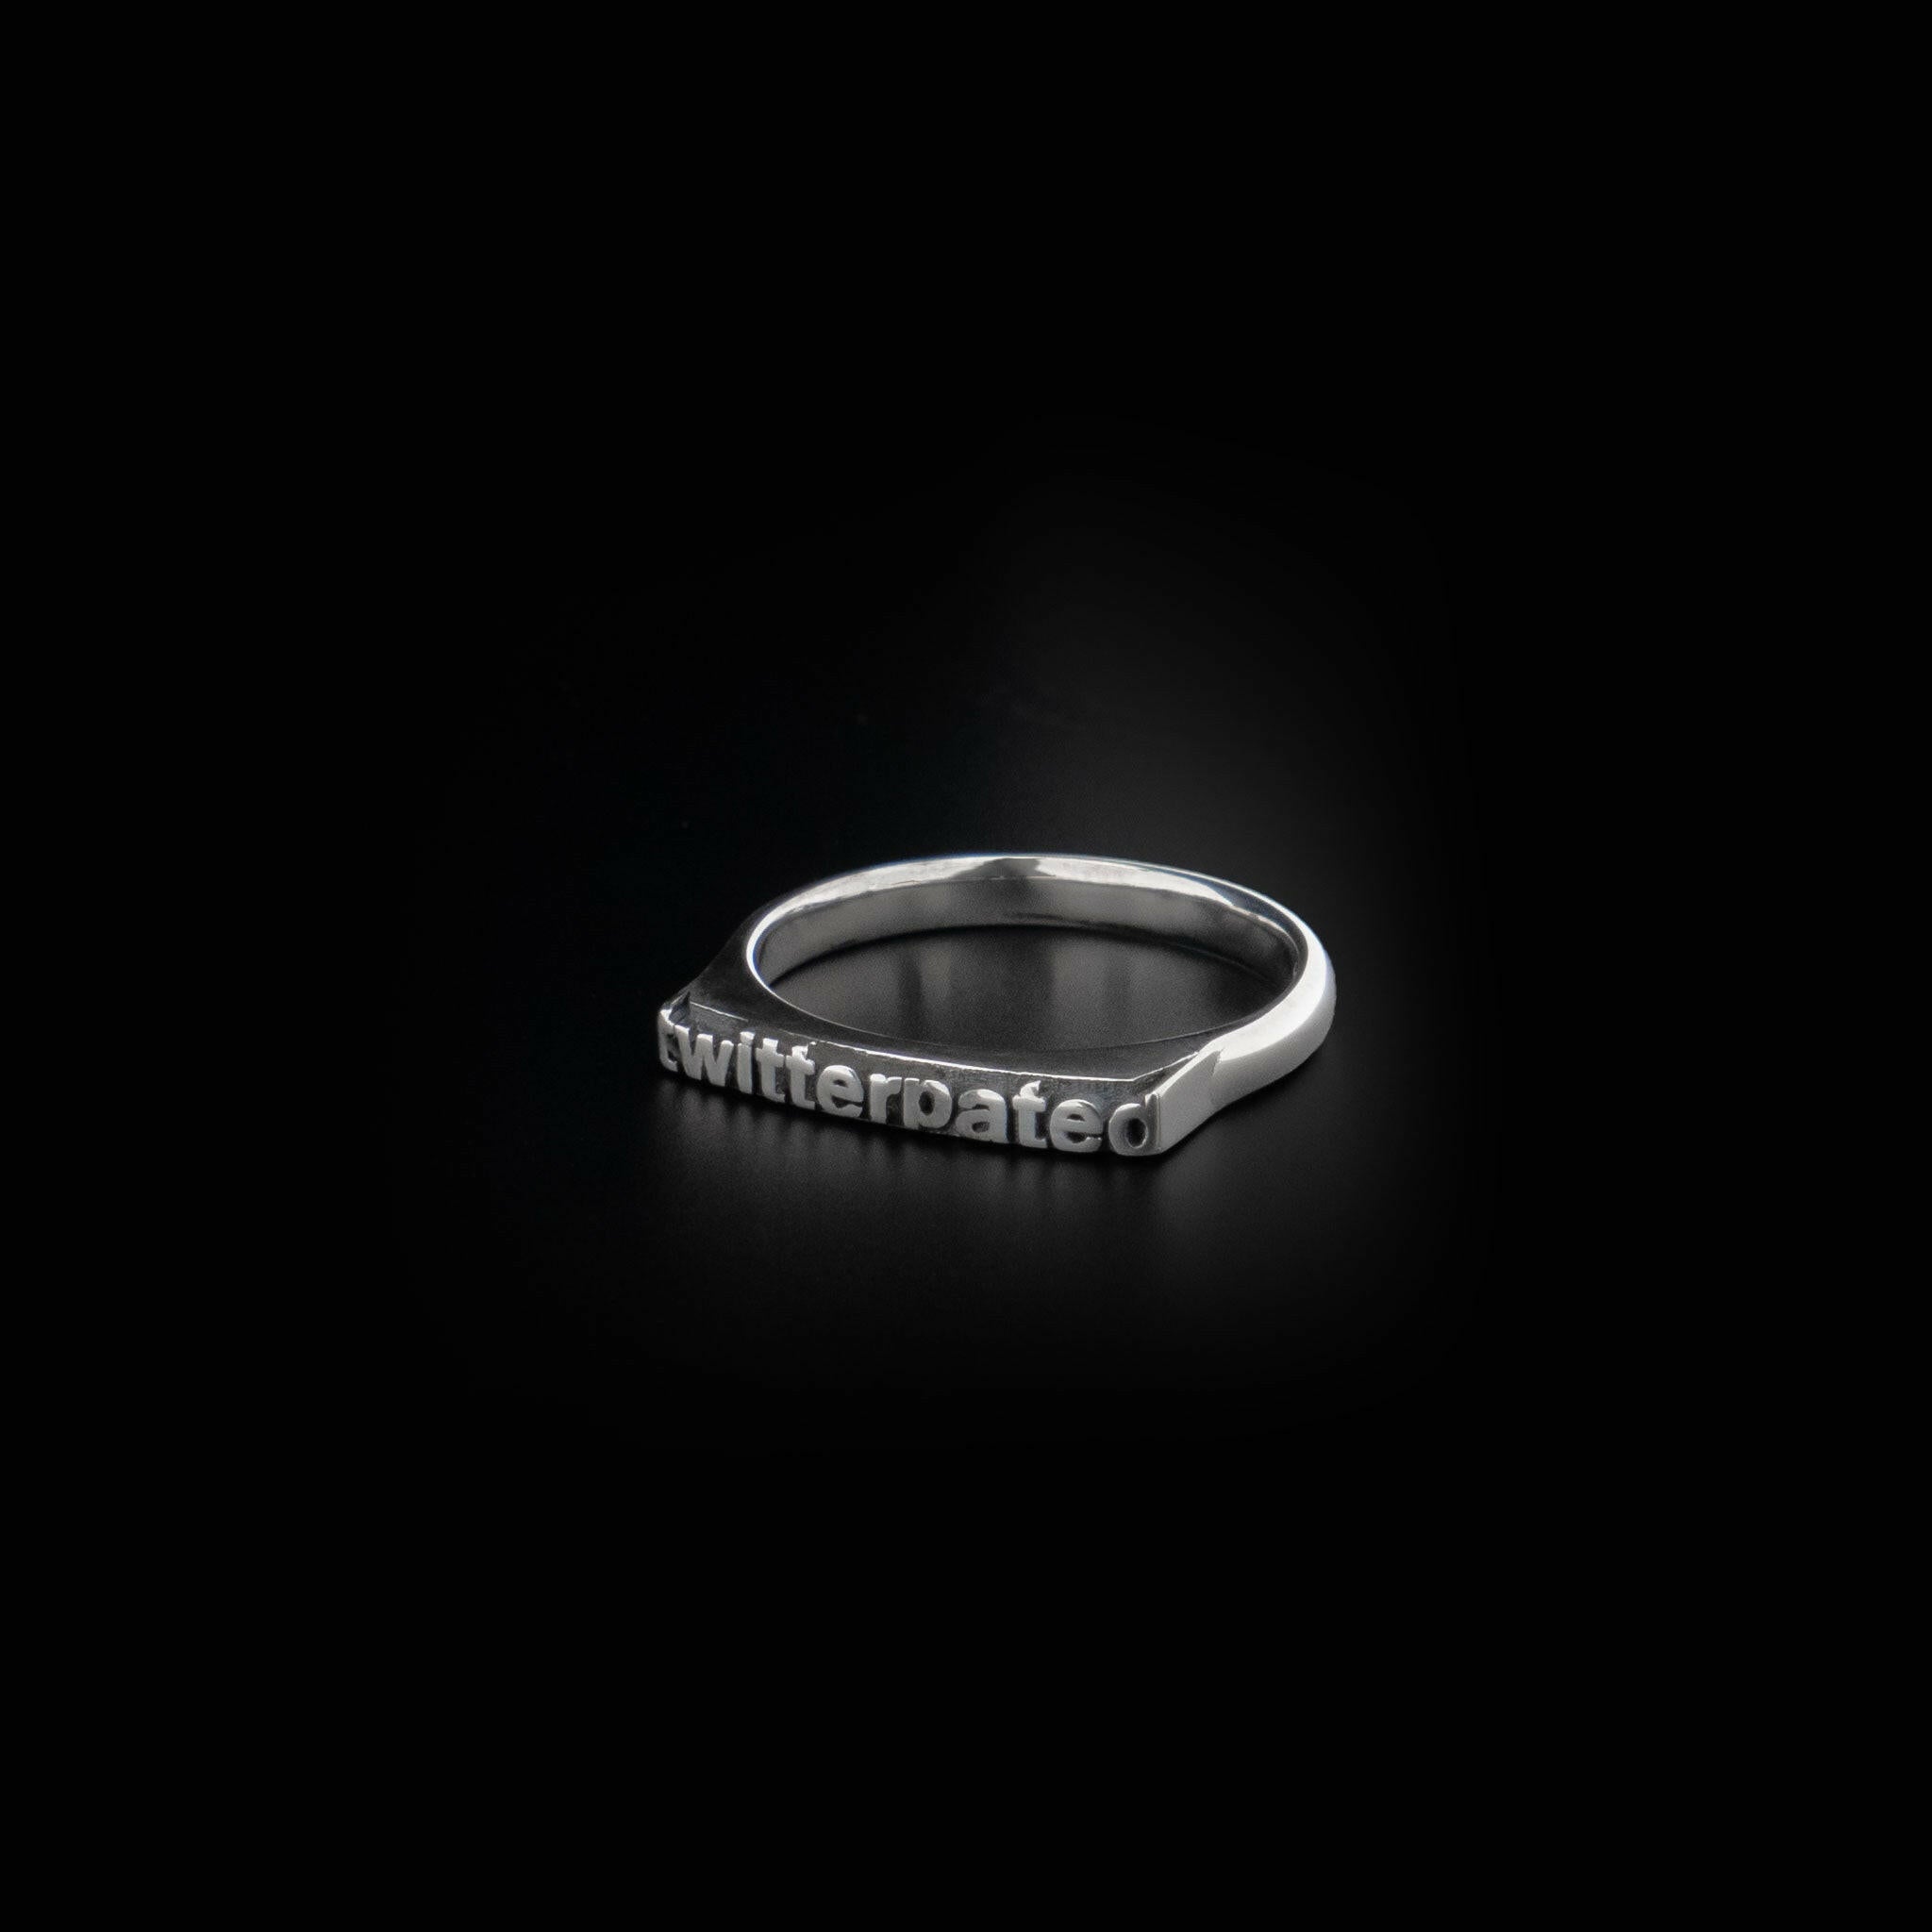 twitterpated ring